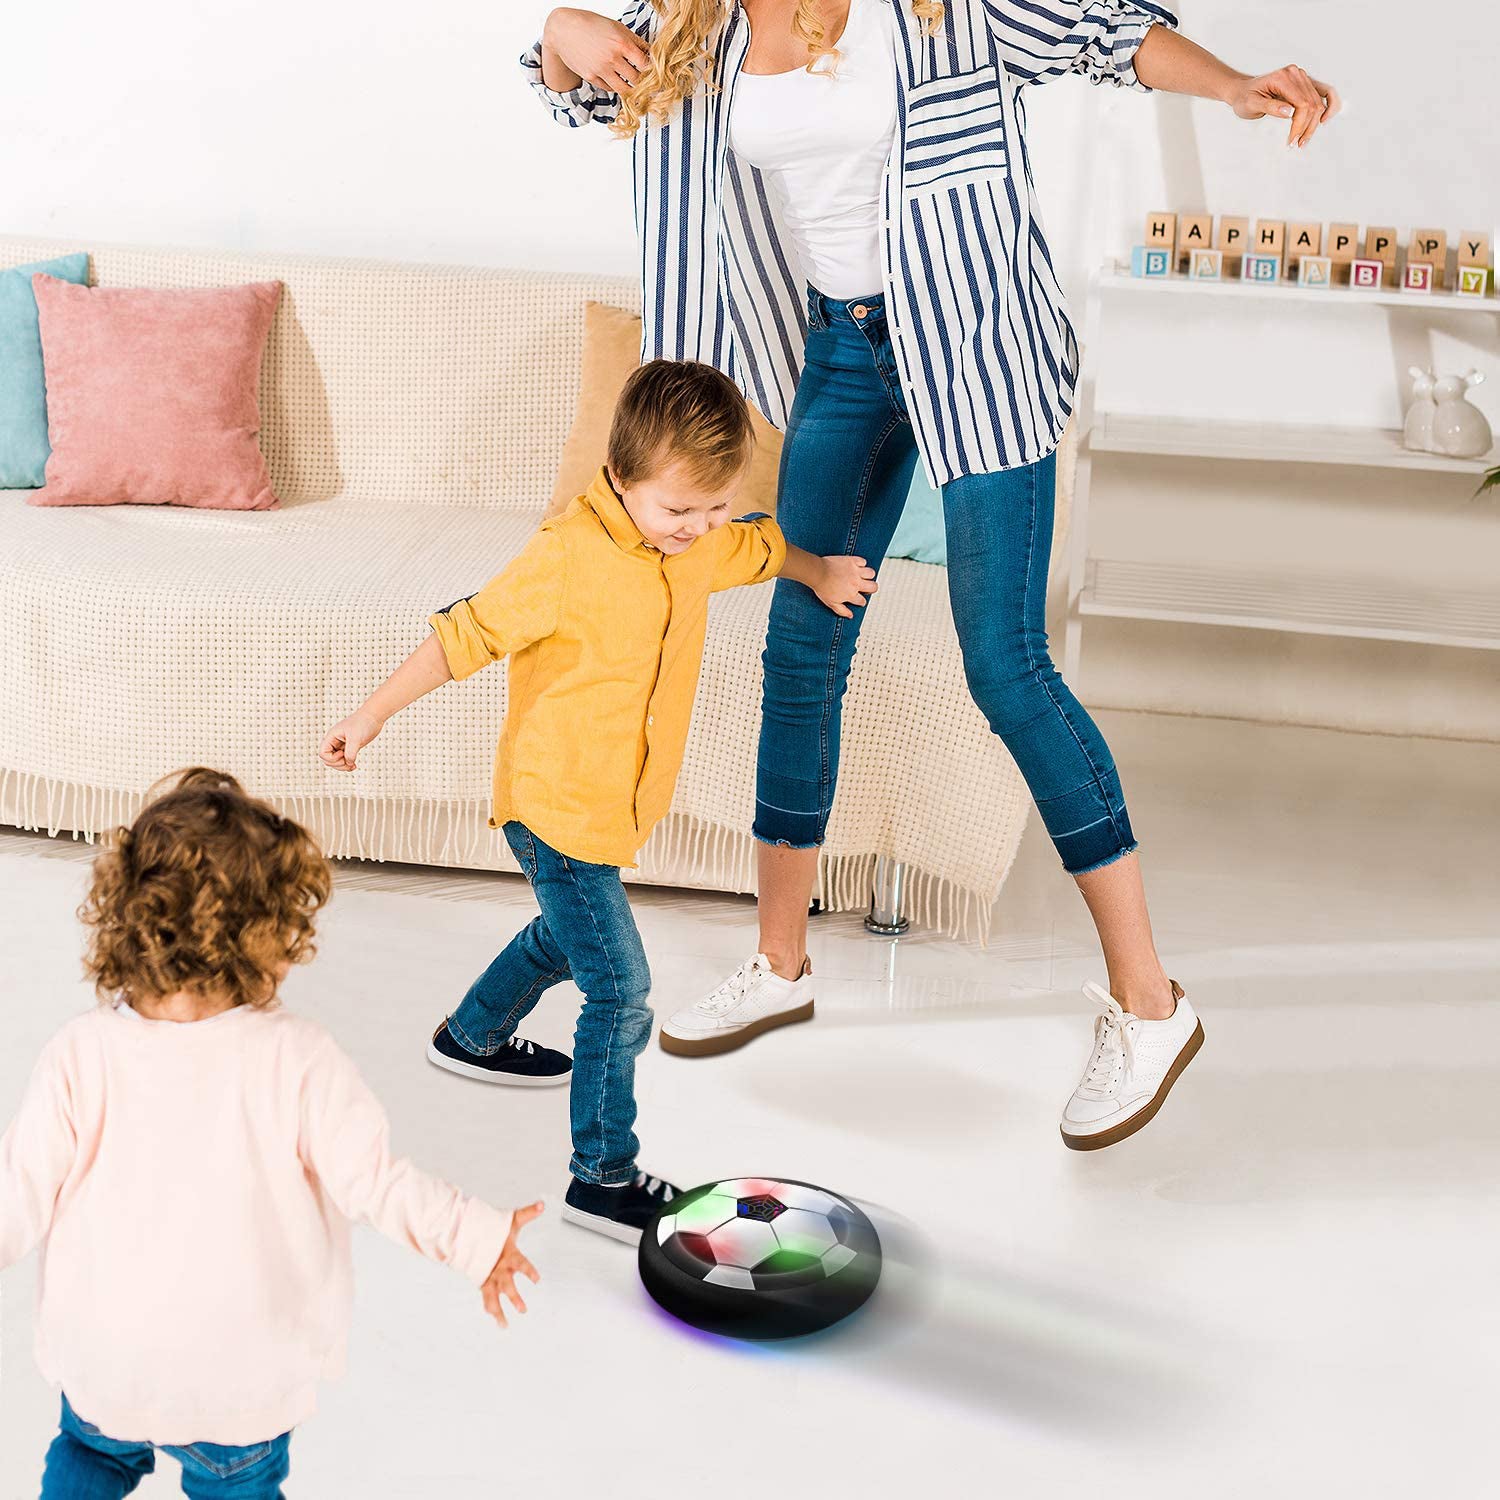 8070 Amazing Hover LED Ball used in all households and playing purposes for kids and children’s etc.